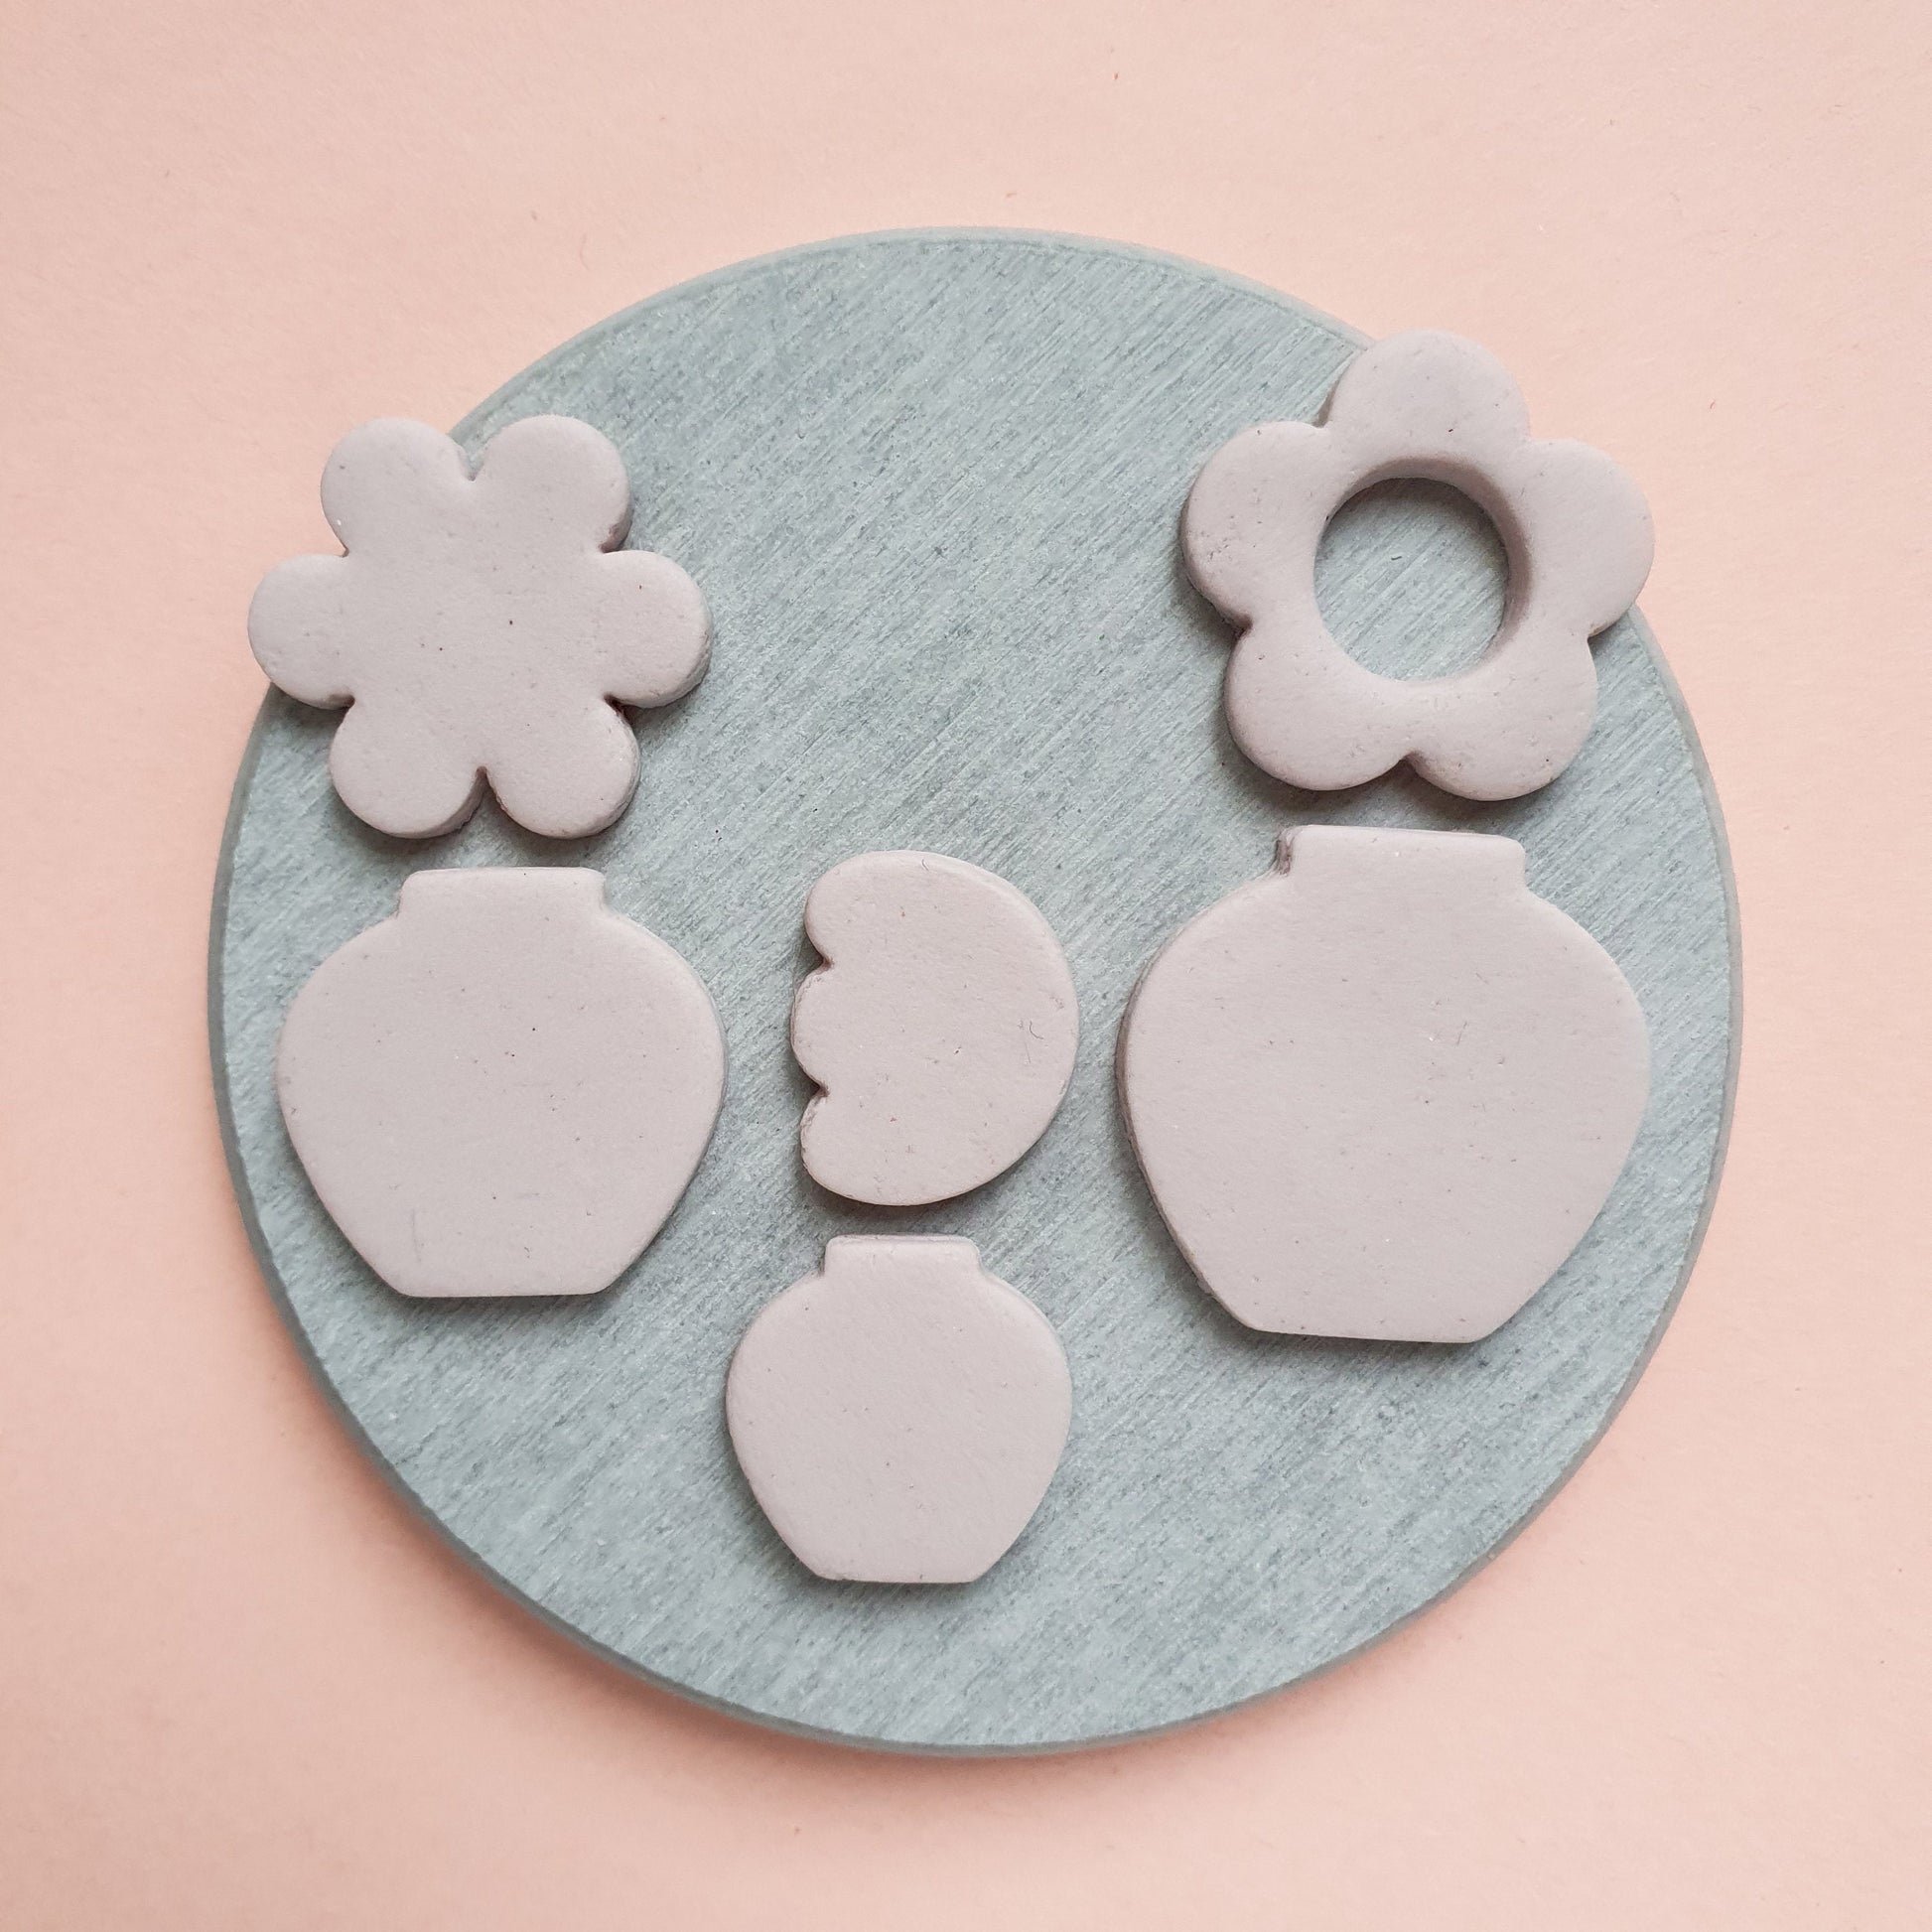 Clay cutters Polymer clay tools earrings jewelry cutters "Vase" - Luxy Kraft